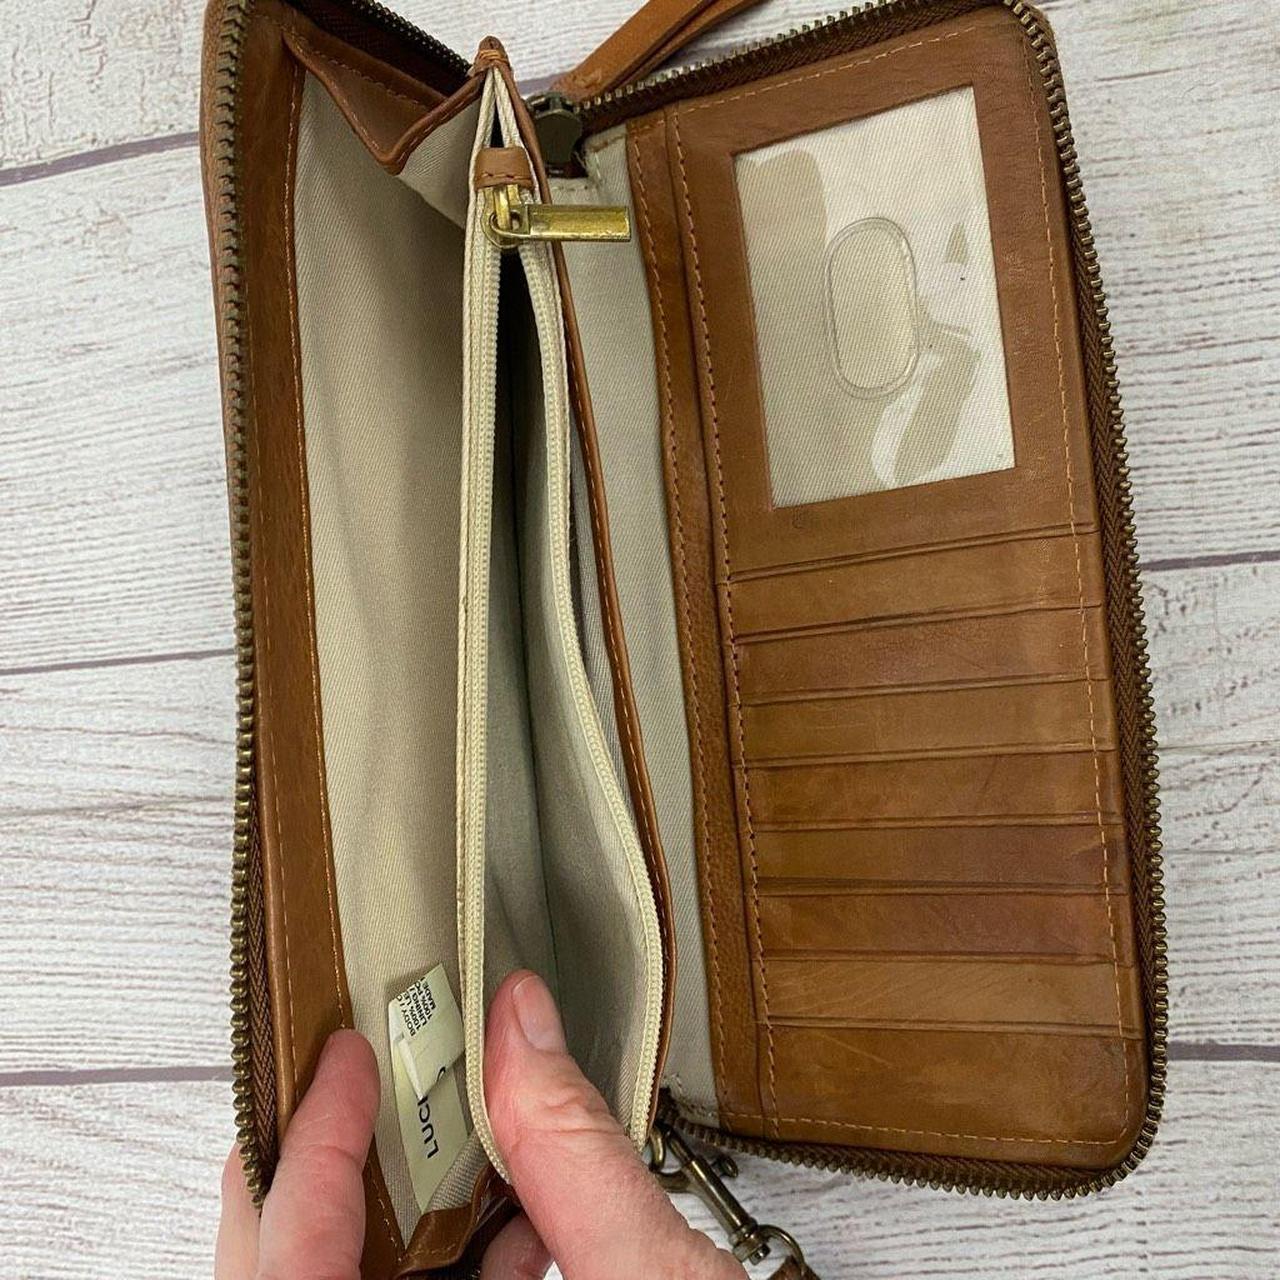 Lucky Brand Koda Leather Wallet Rectangular Clutch (Color is called Dune)  NWT | eBay